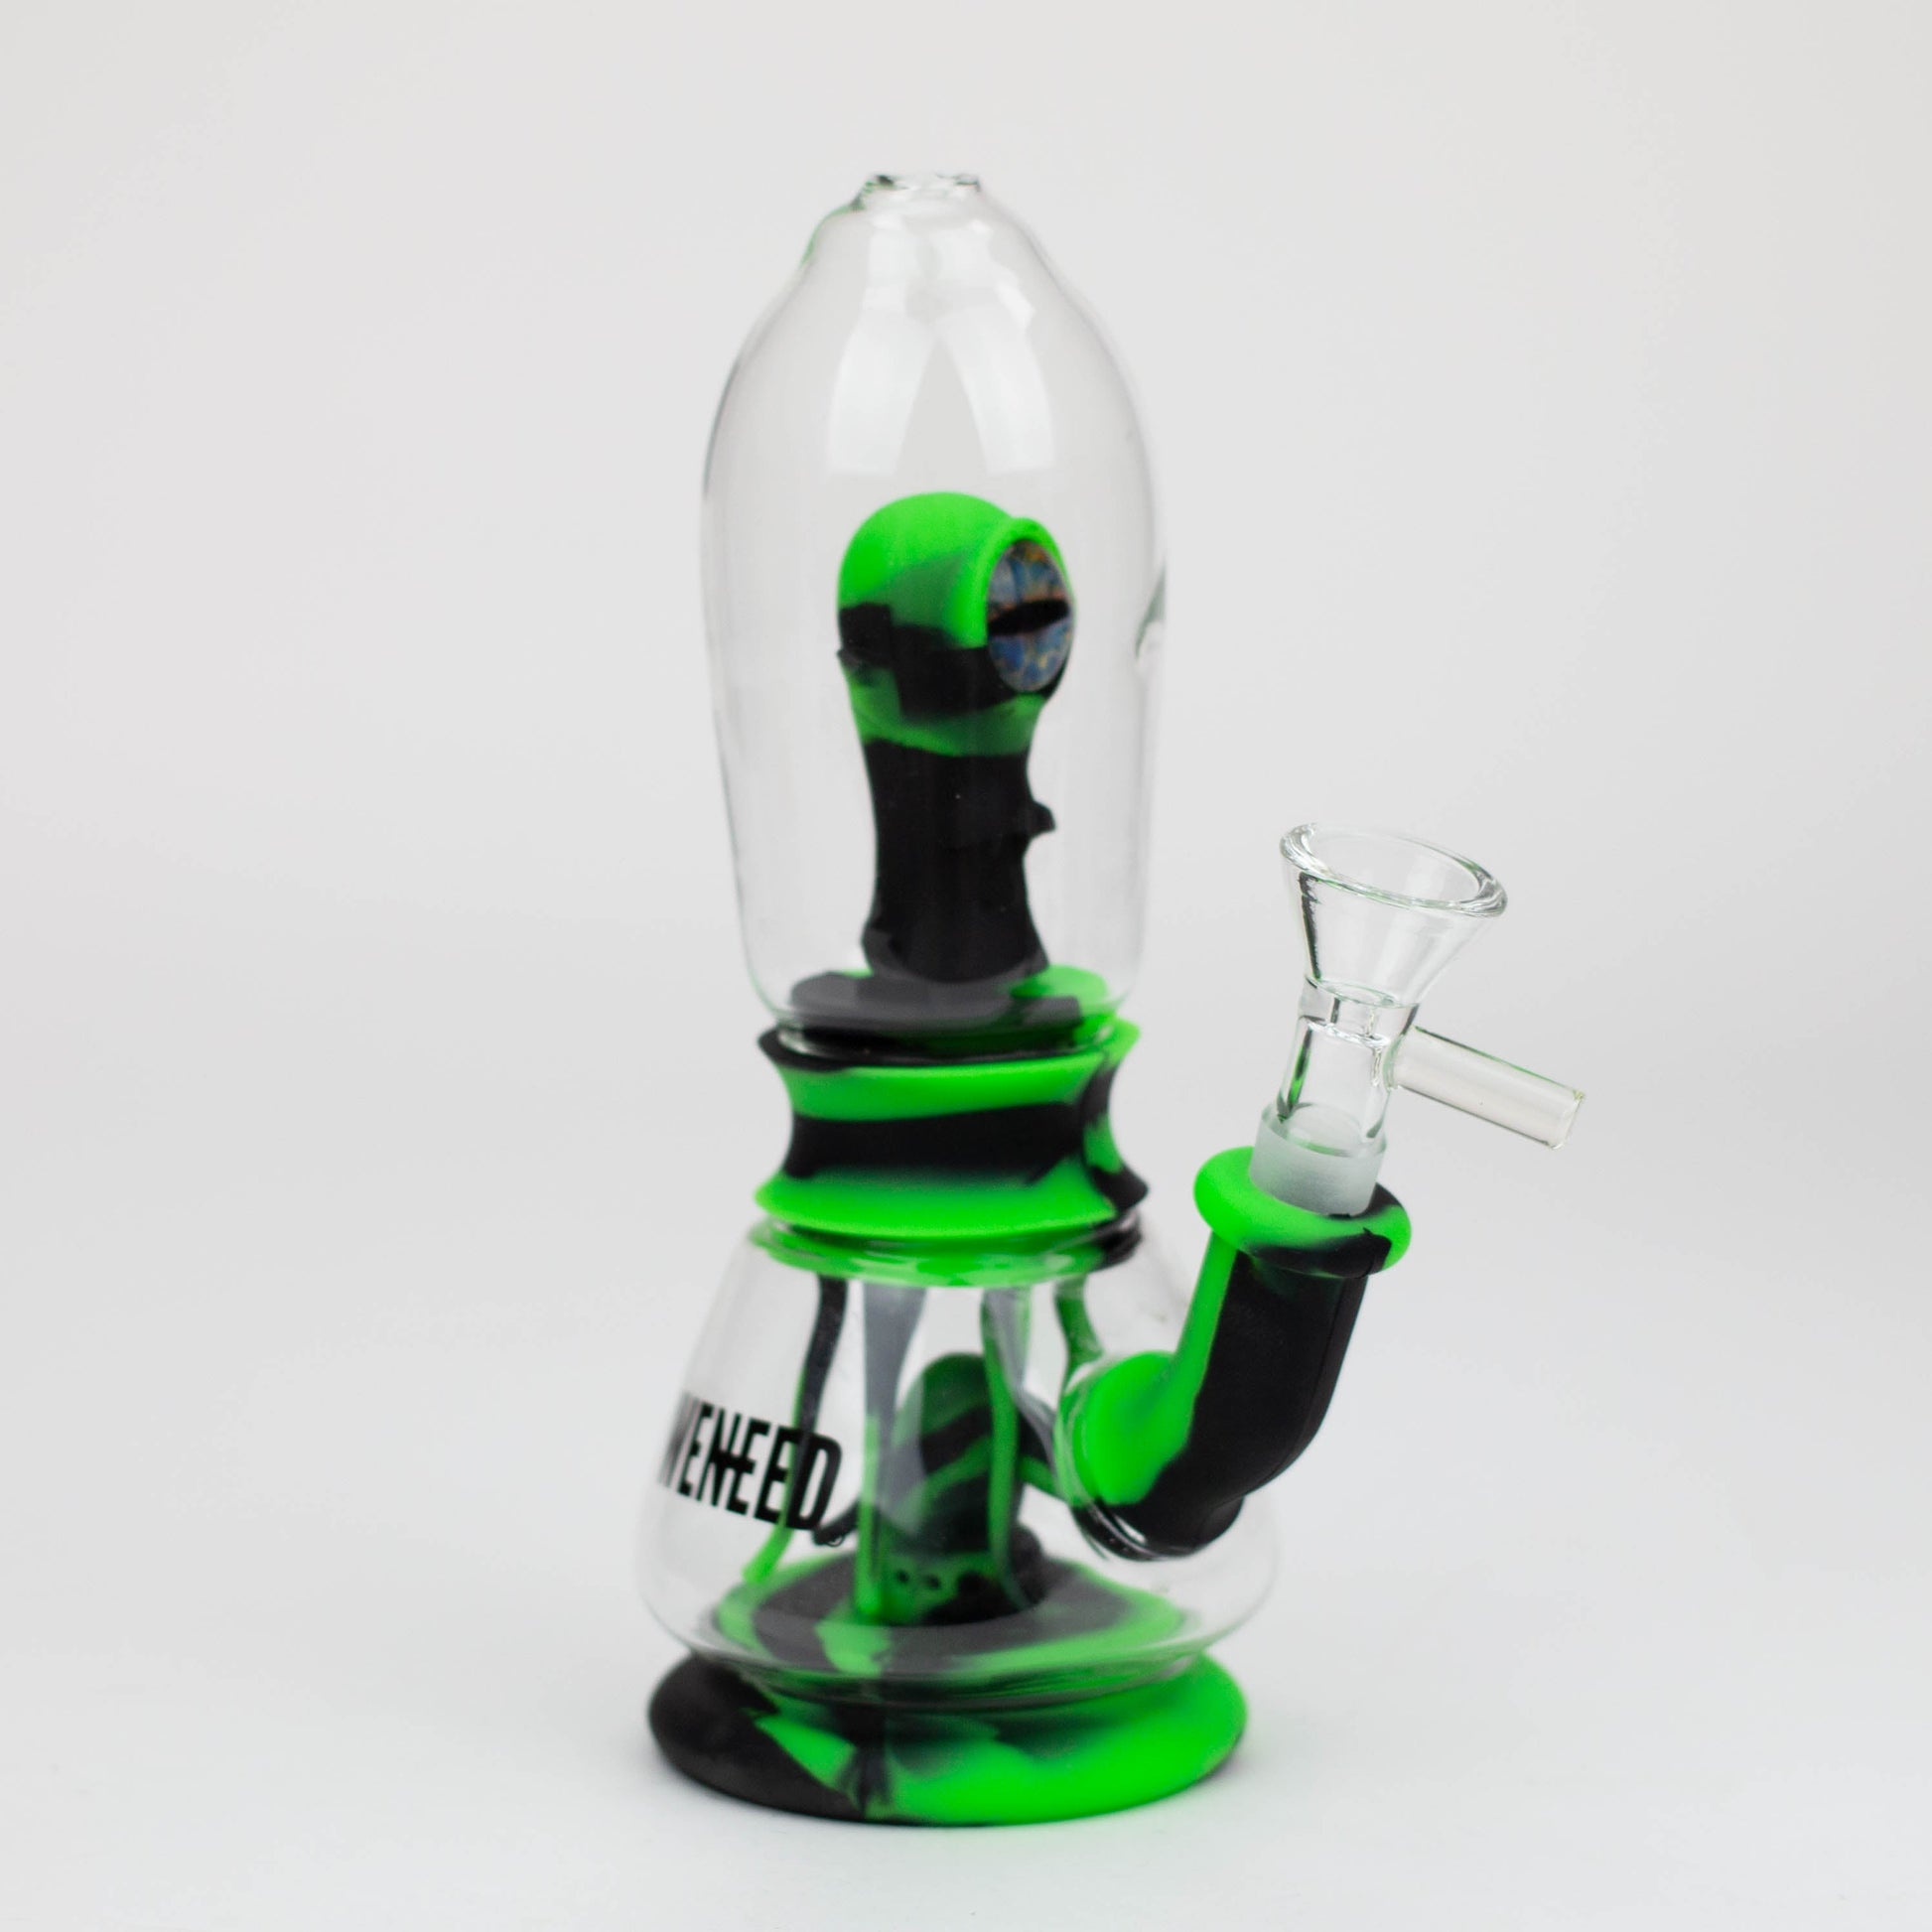 WENEED®- 7" Silicone Monster Double Filter bong_6